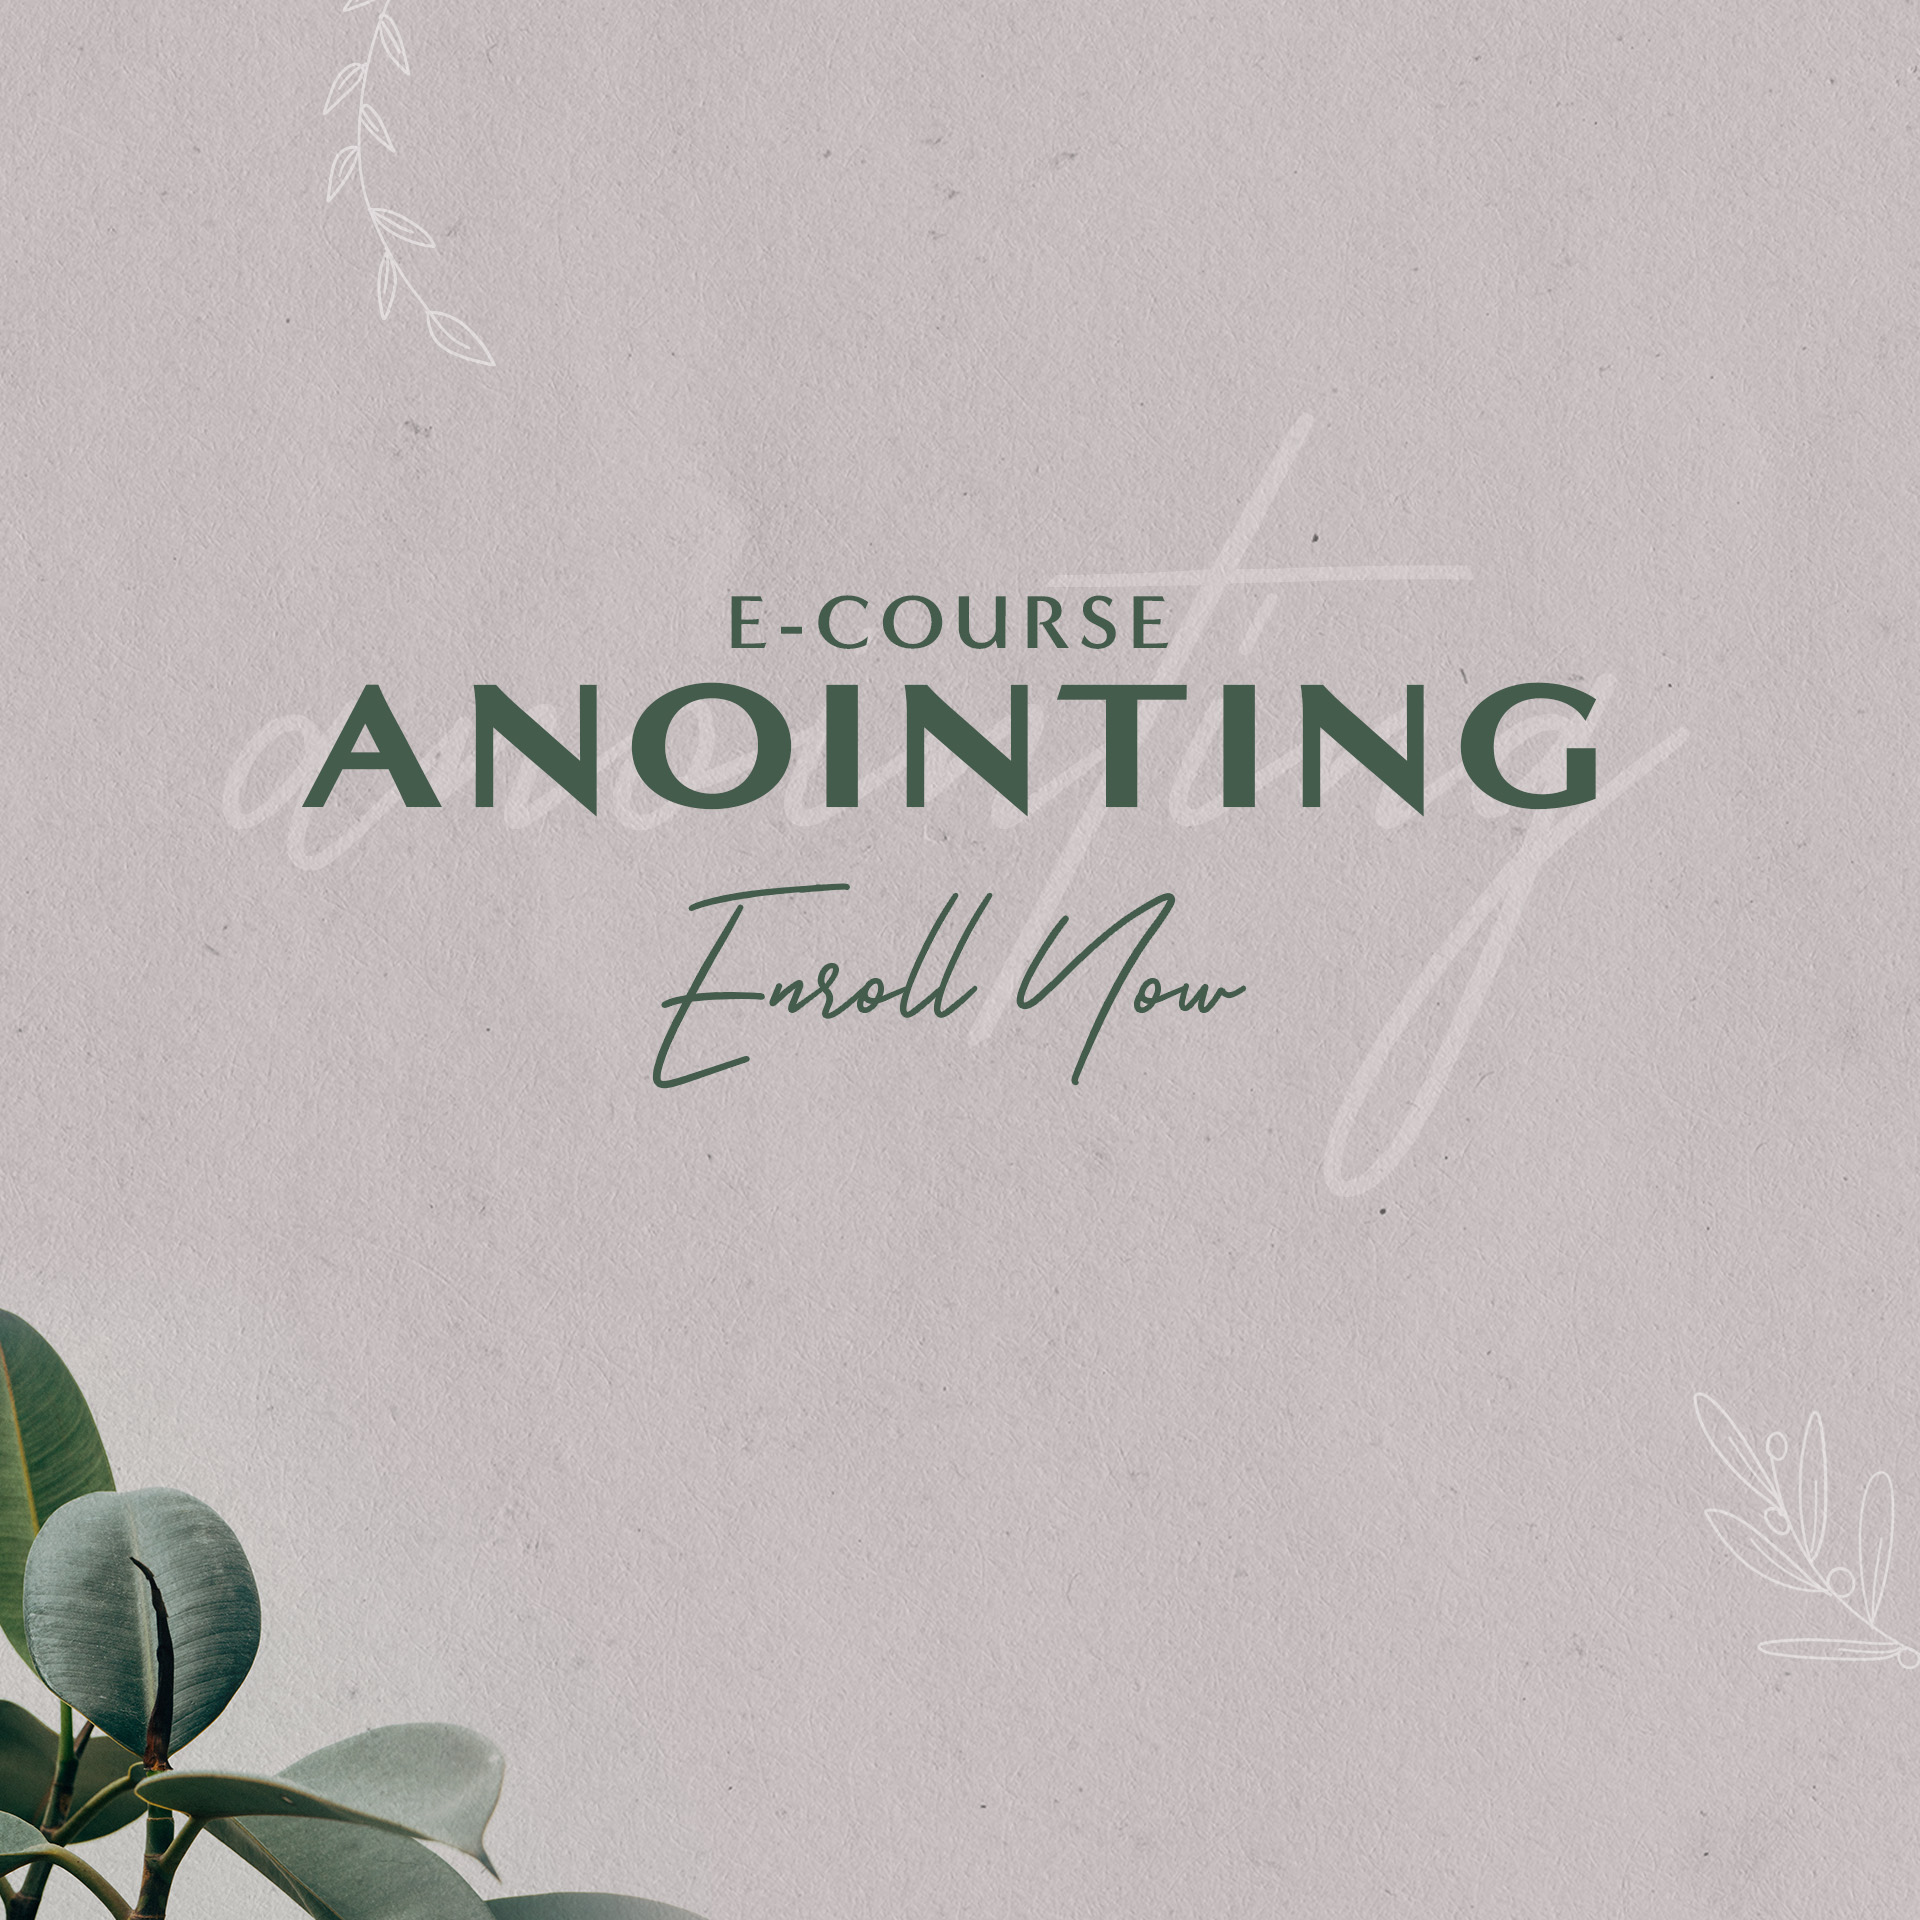 resource - Anointing